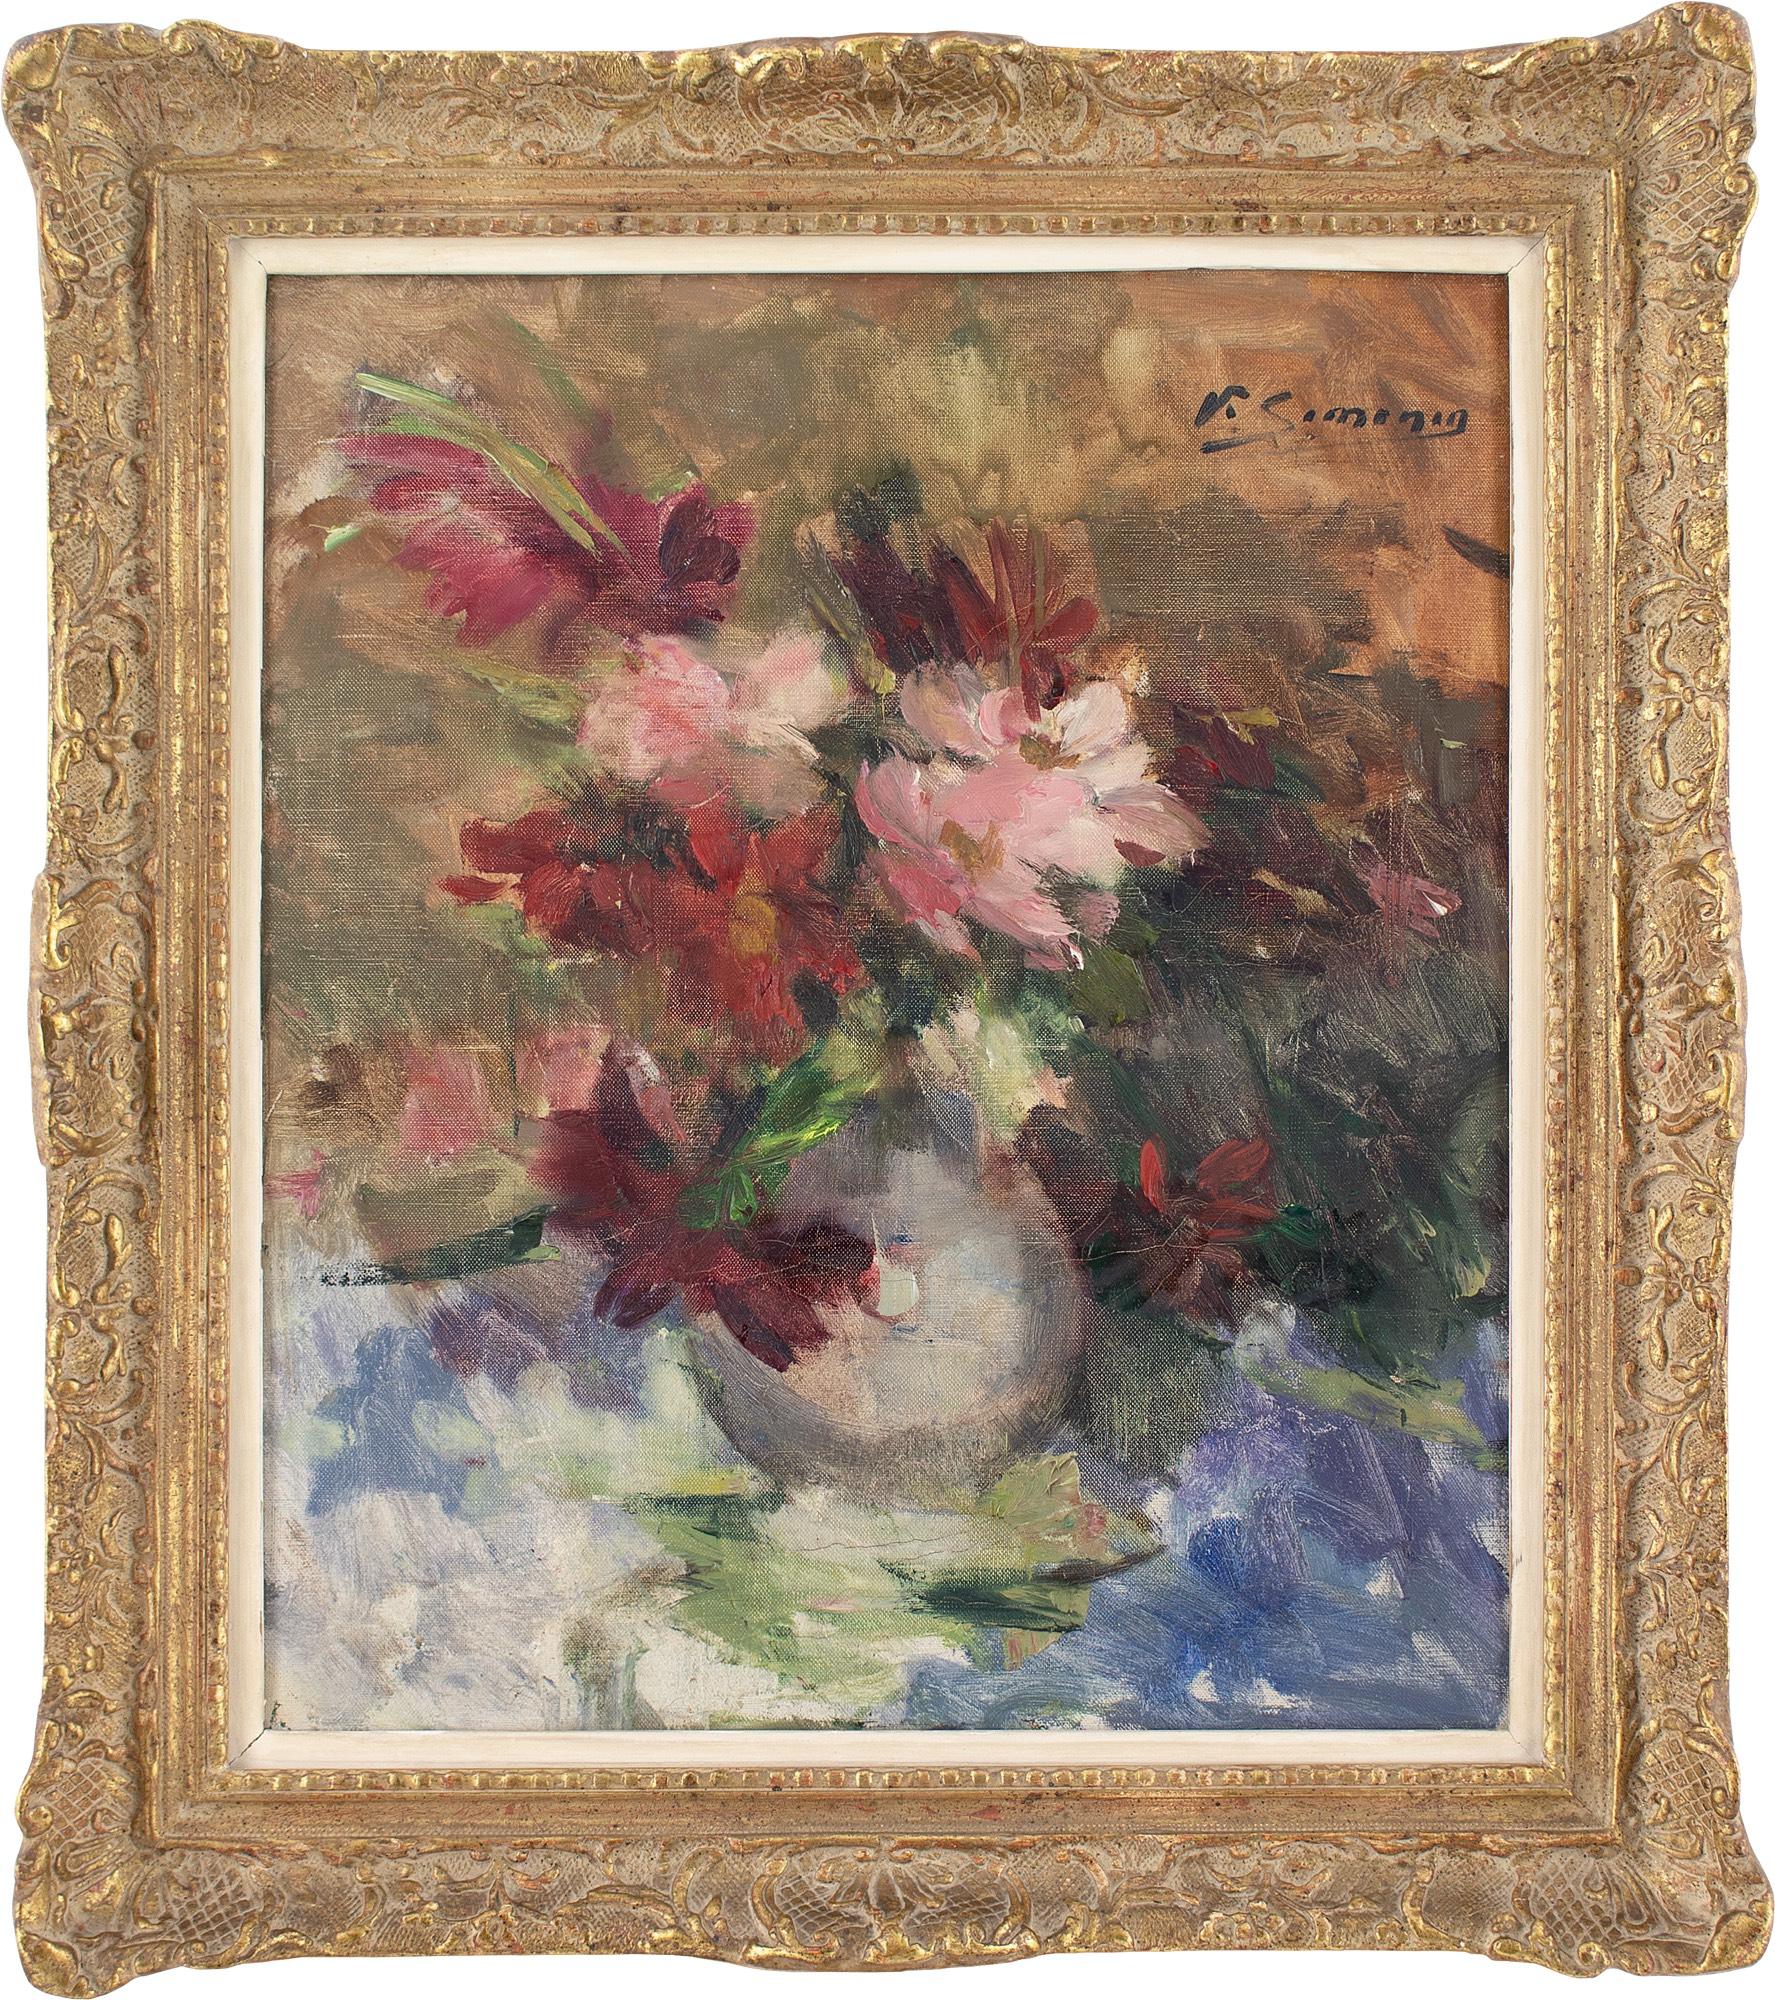 This early to mid-20th-century oil painting by Belgian artist Victor Simonin (1877-1946) depicts a vase of red and pink flowers.

Described as a “tender bohemian”, Simonin was predominantly known for his spirited landscapes and stills. Hailing from